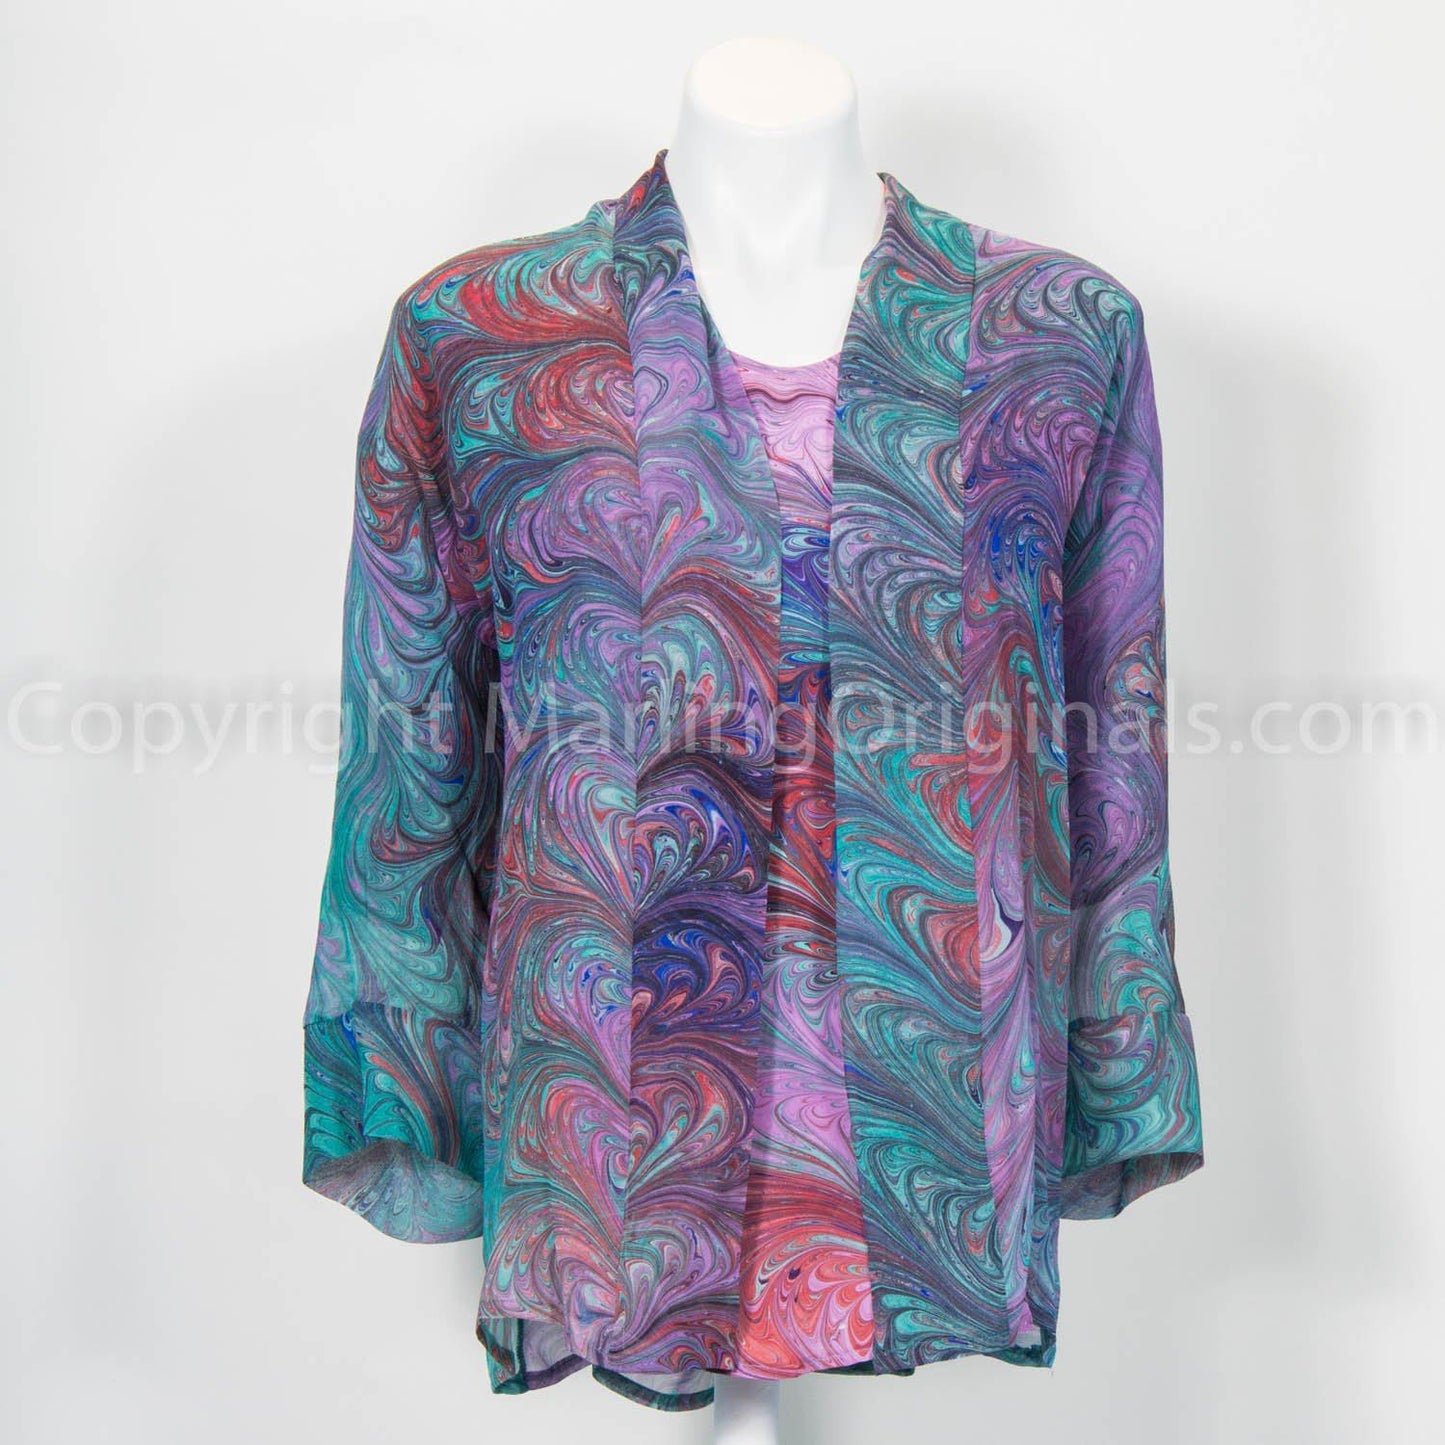 Marbled sheer kimono shown with matching silk top.  Marbled in violet, green, blue, red.  